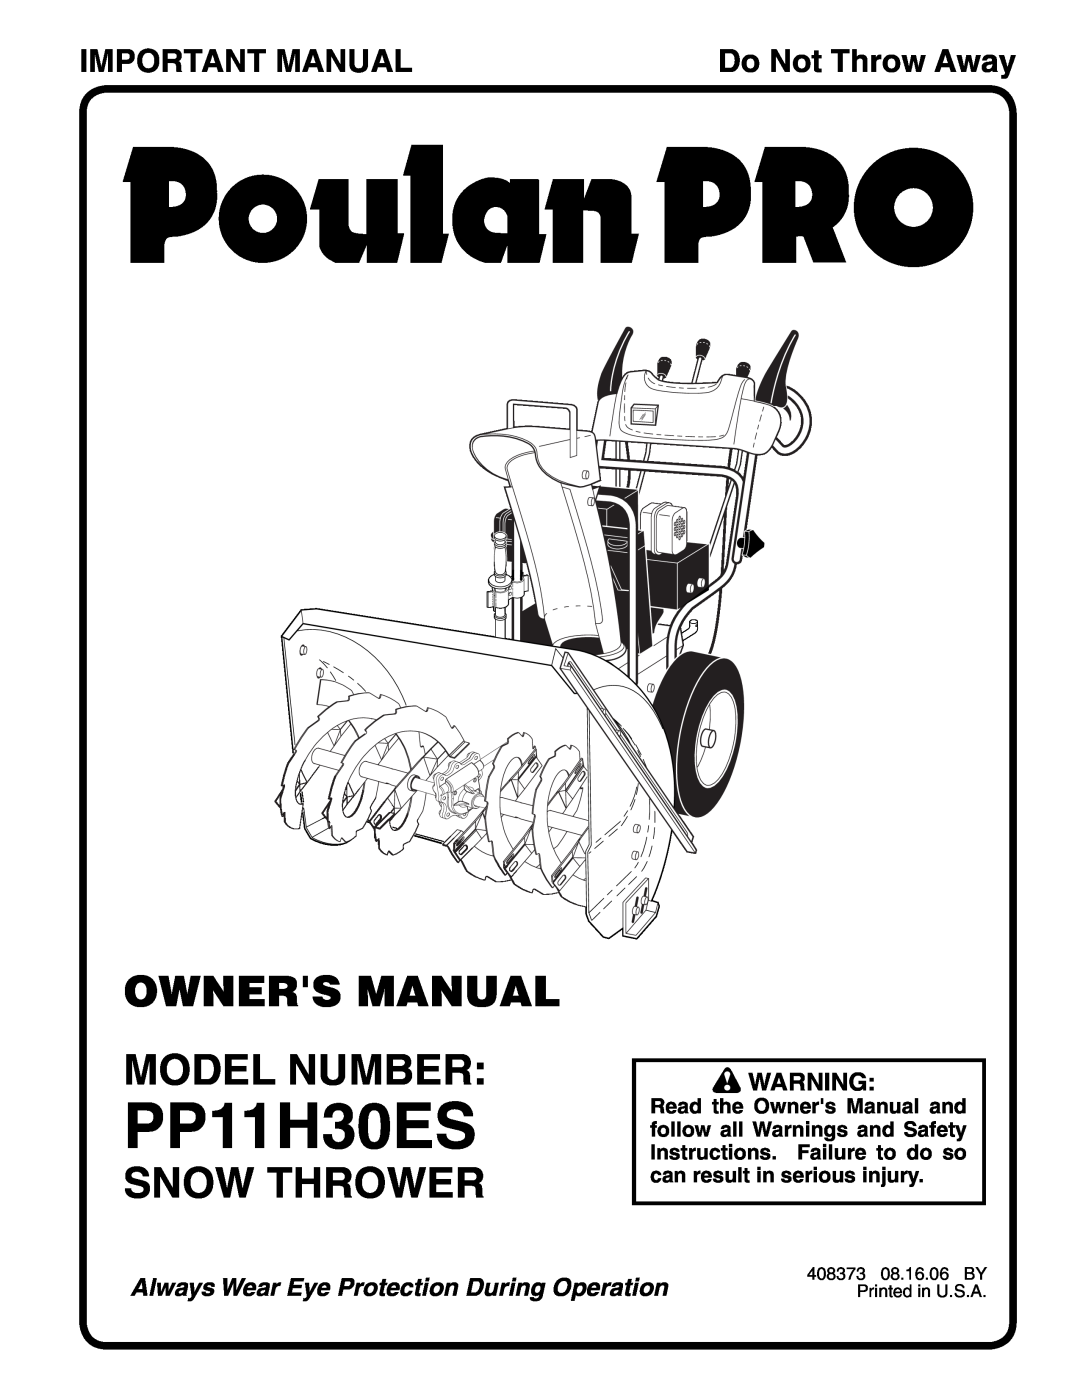 Poulan 408373 owner manual Owners Manual Model Number, Snow Thrower, Important Manual, PP11H30ES, Do Not Throw Away 